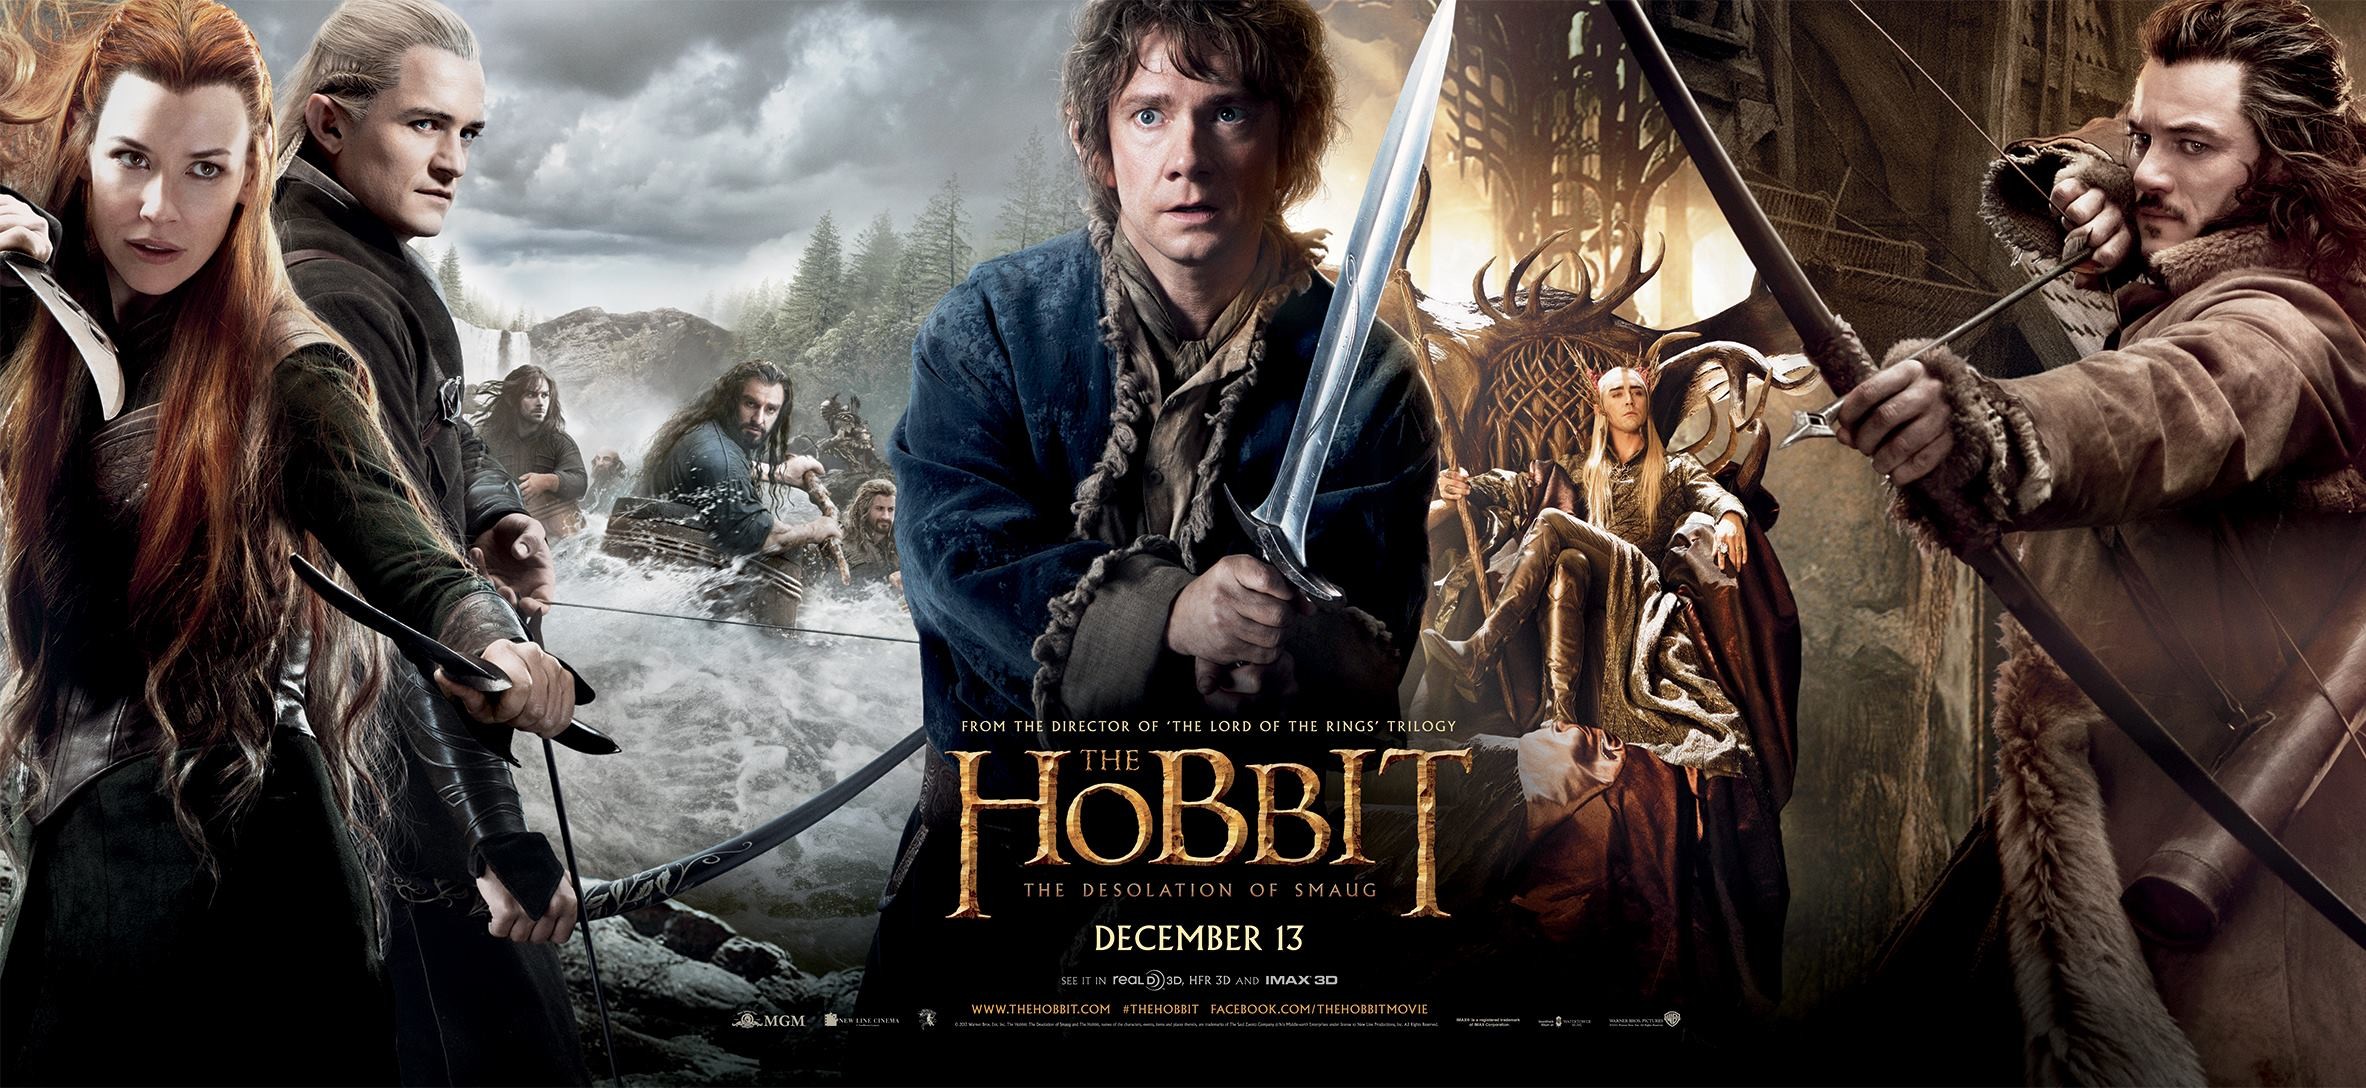 Mega Sized Movie Poster Image for The Hobbit: The Desolation of Smaug (#22 of 33)